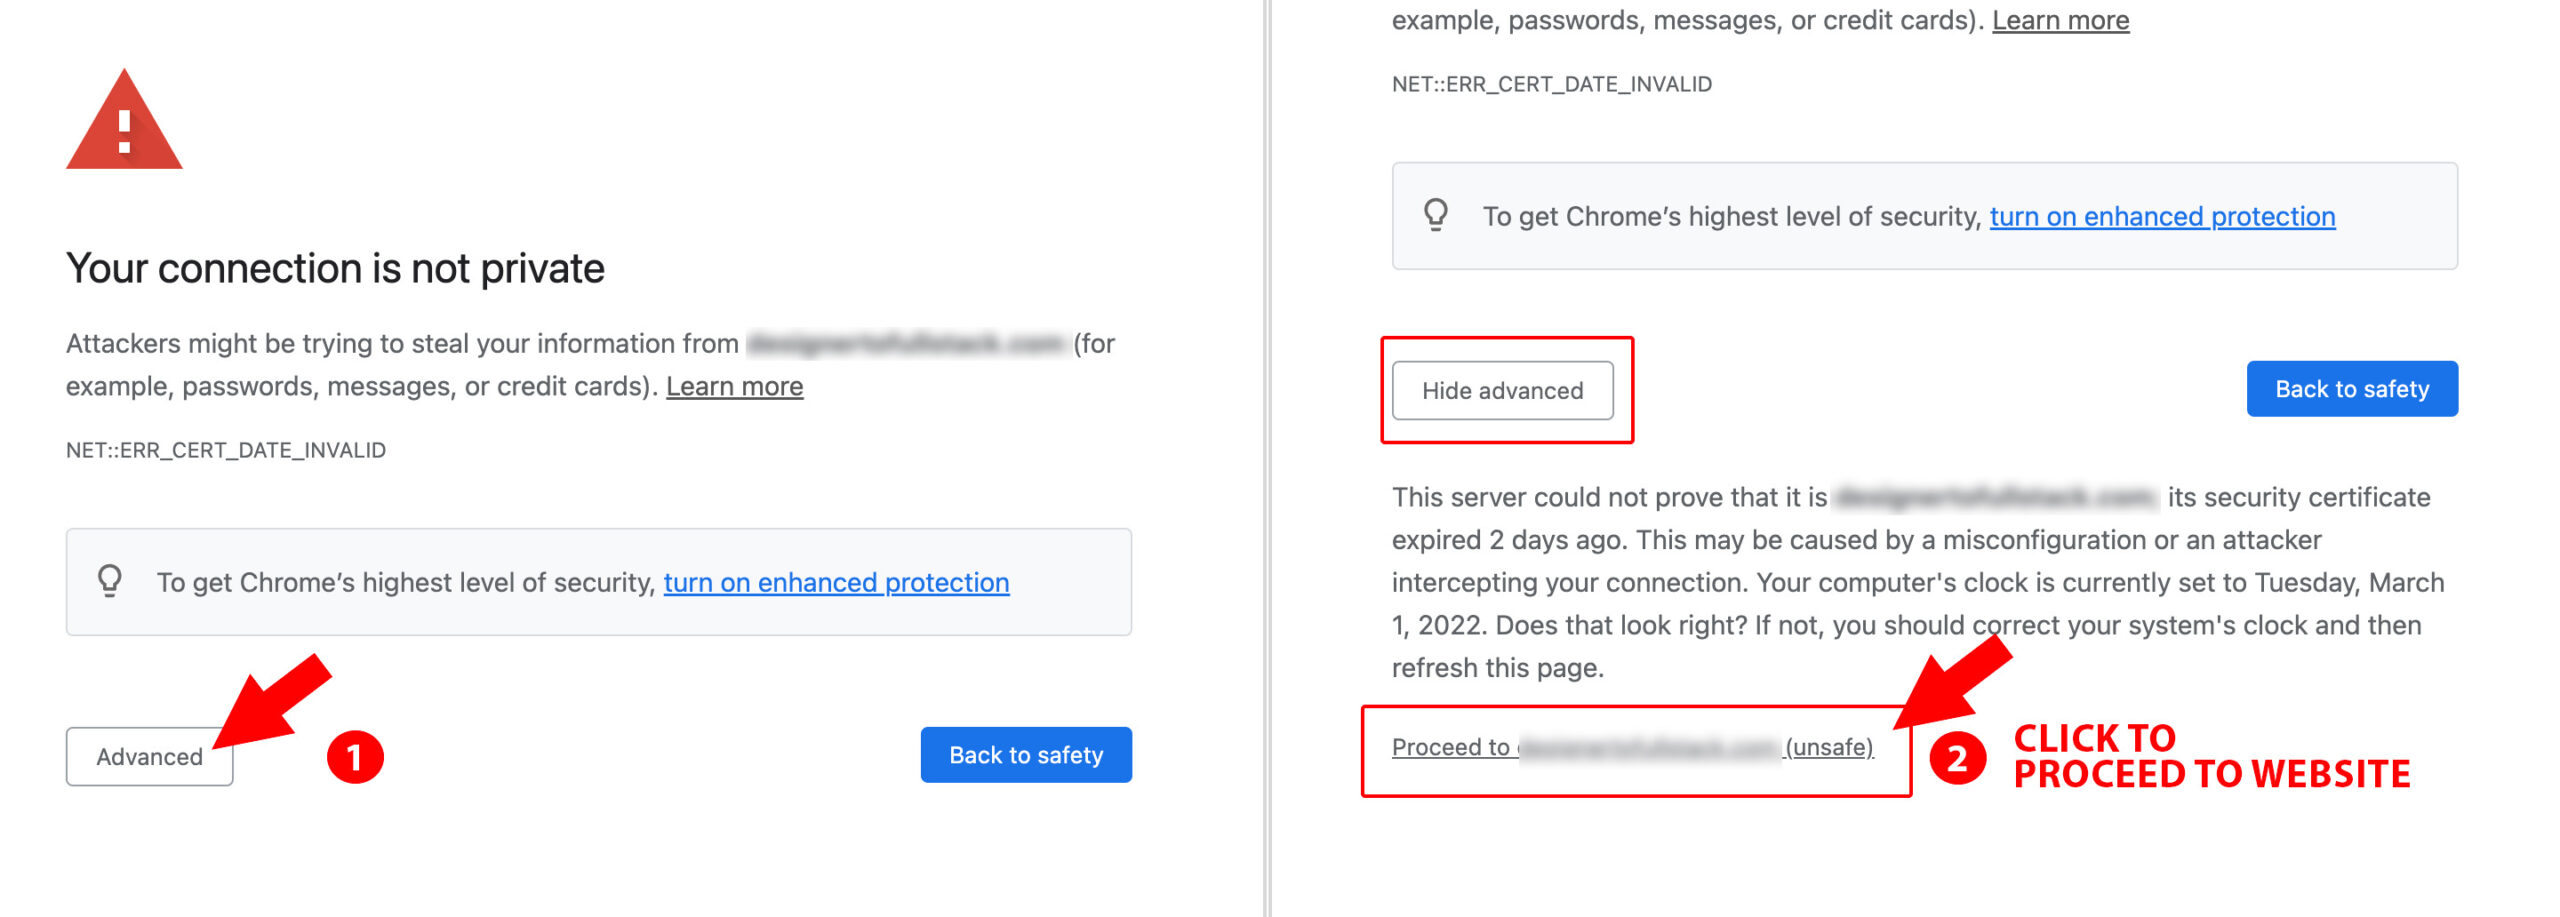 Instructions for how to view a website that has an expired SSL certificate in Chrome. Click the ADVANCED button and then Proceed link.